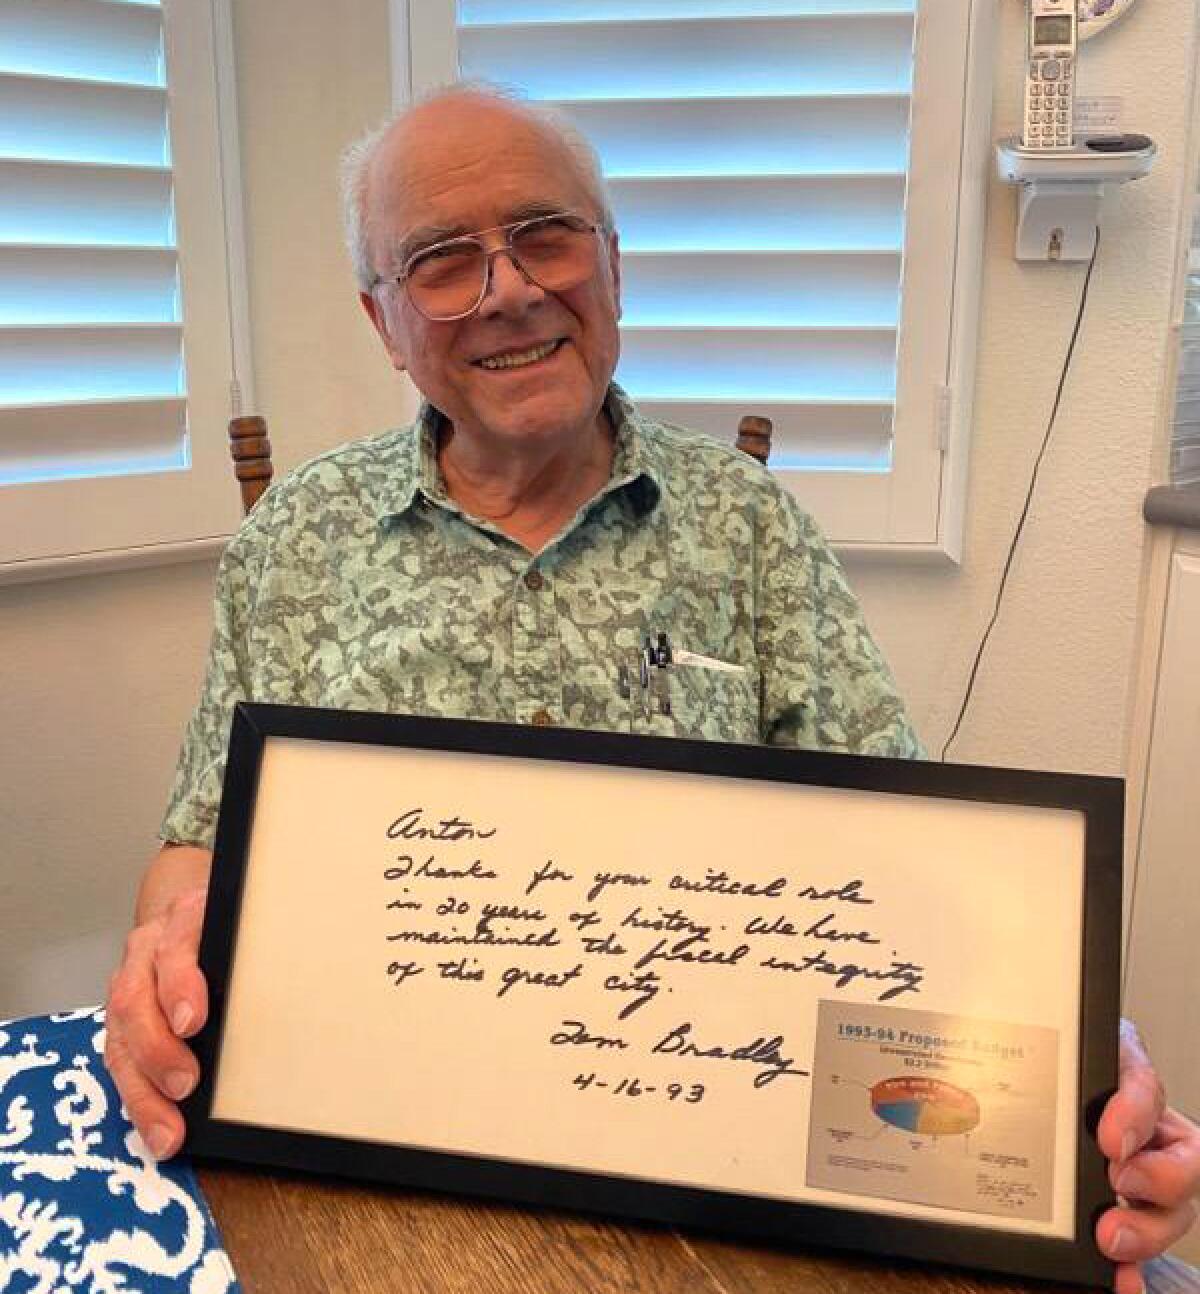 A smiling man holds a framed document signed by Tom Bradley and dated April 16, 1993.